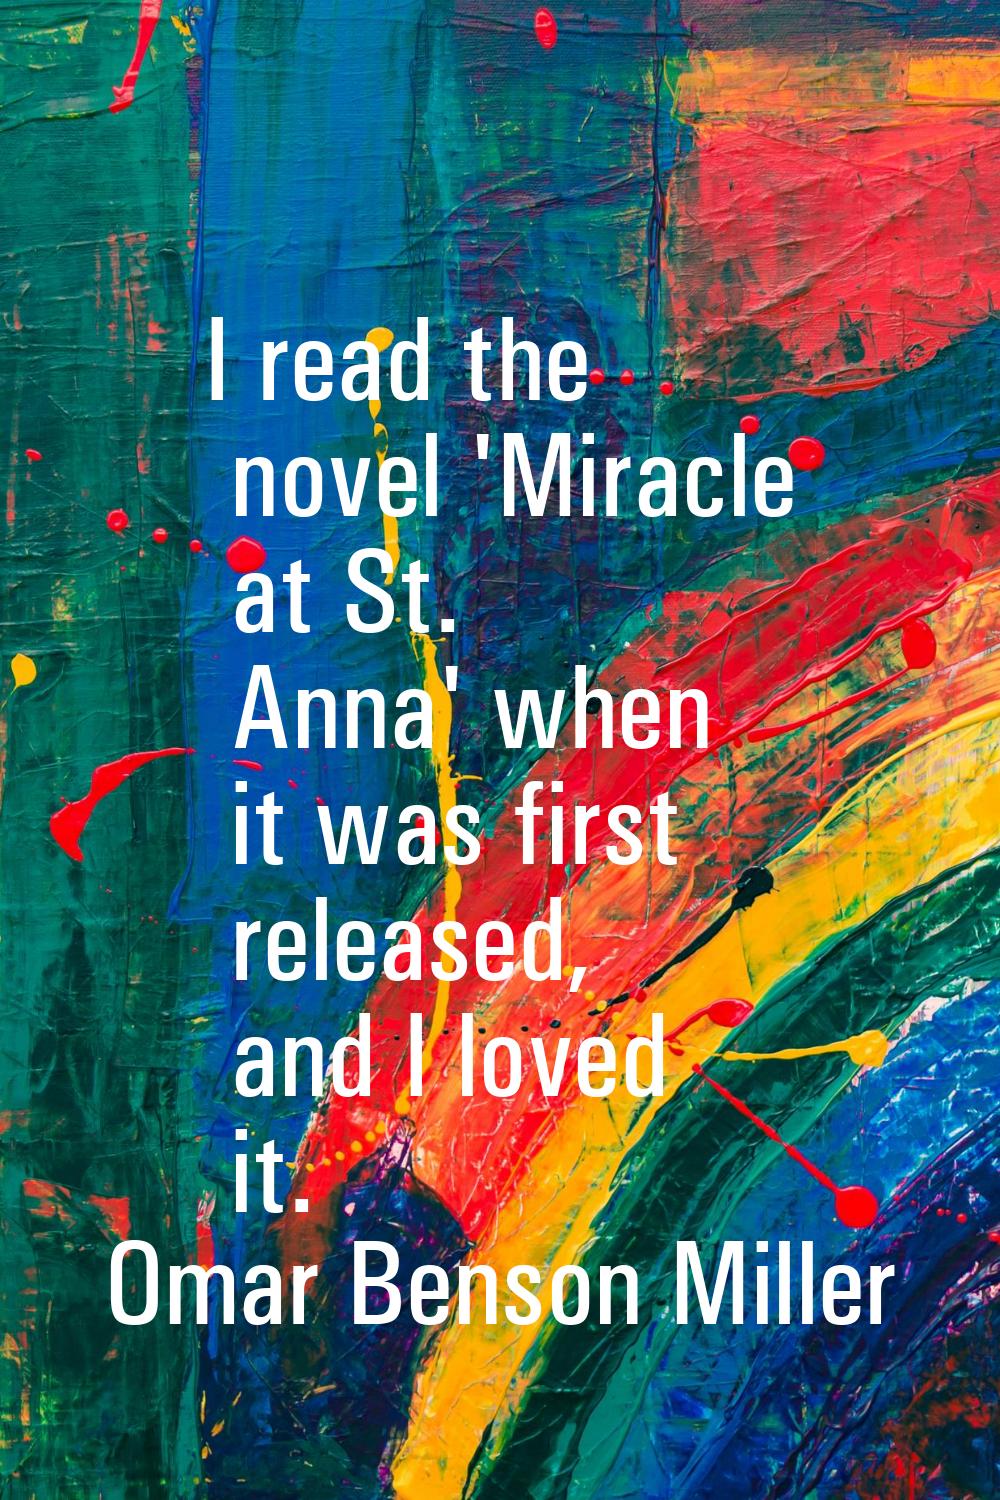 I read the novel 'Miracle at St. Anna' when it was first released, and I loved it.